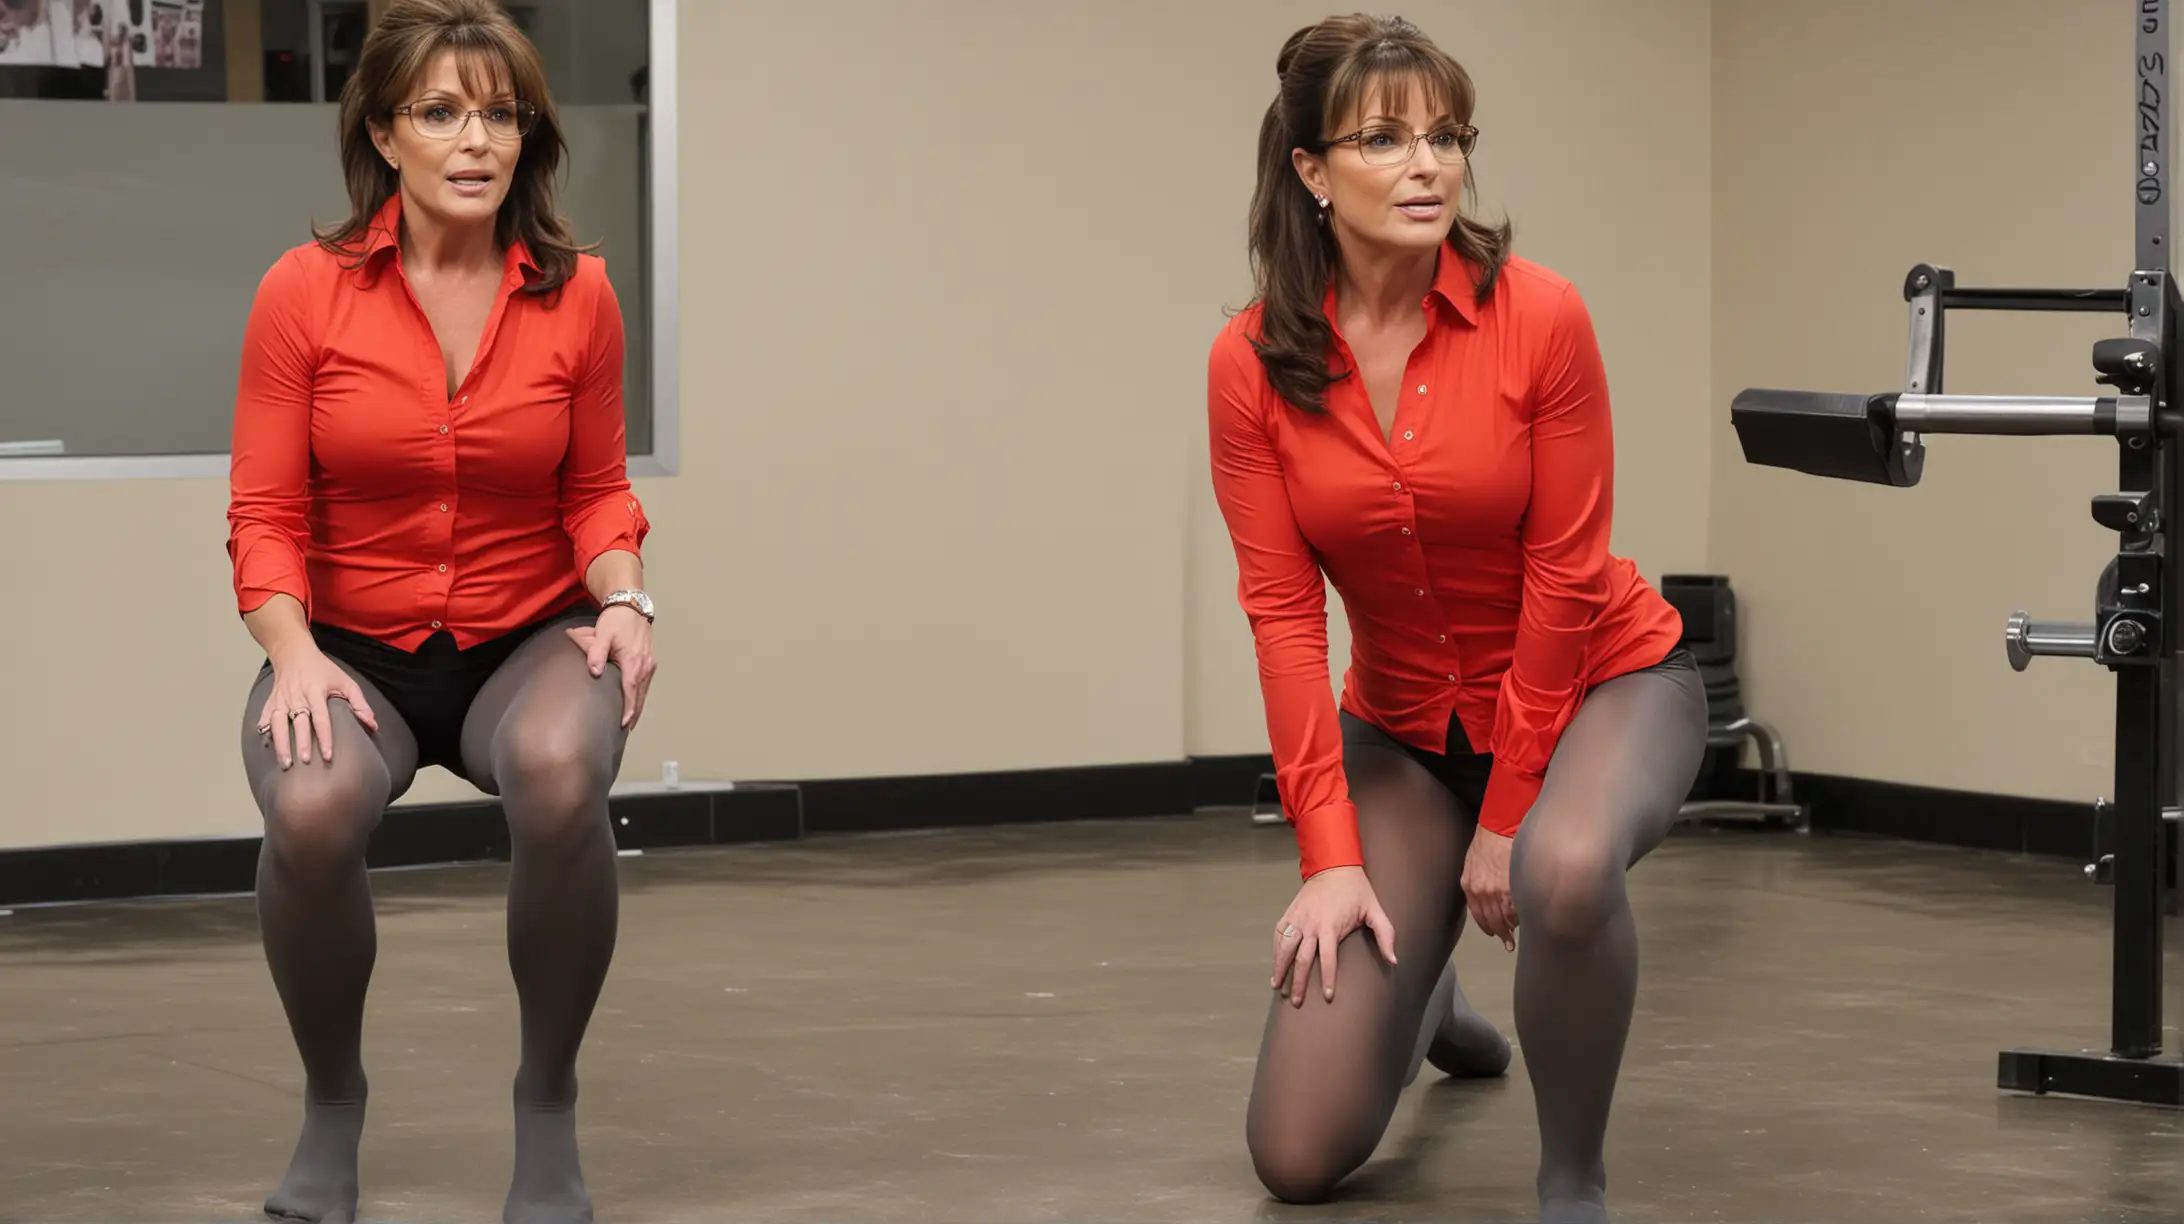 Sarah Palin and Lauren Boebert Squatting in Red Shirts at Exercise Class